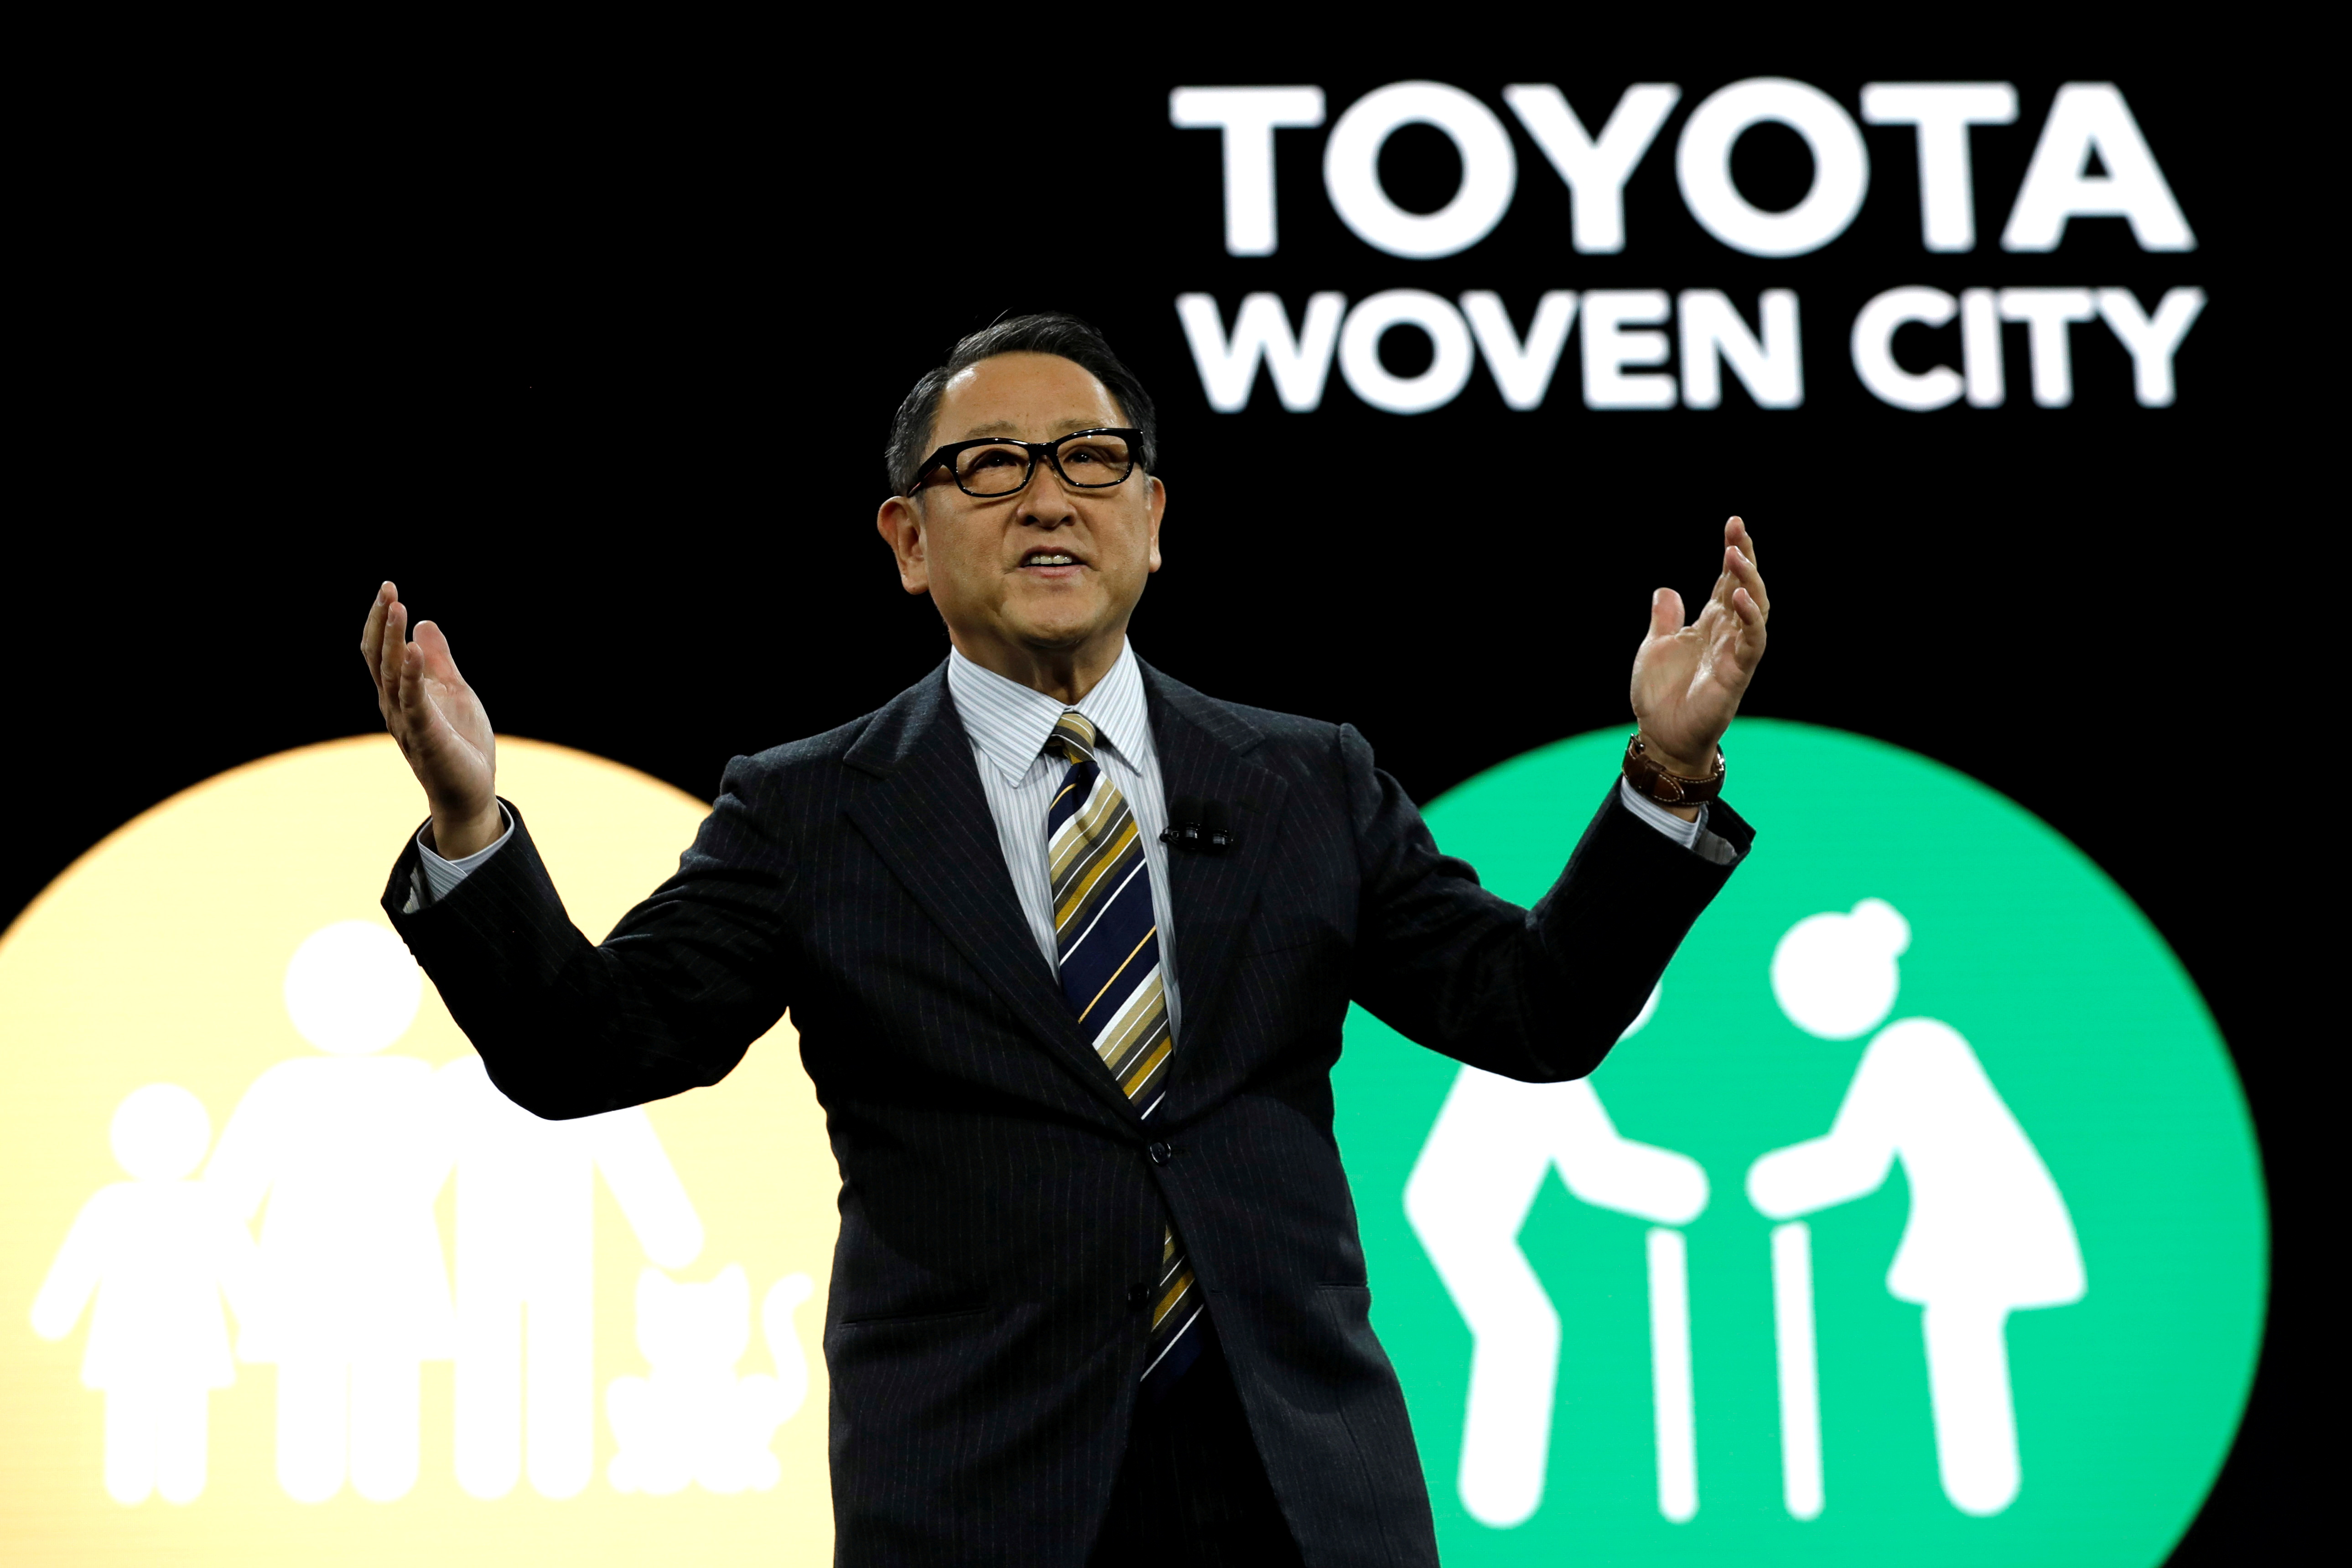 Akio Toyoda, president of Toyota Motor Corporation, speaks at a news conference, where he announced Toyota's plans to build a prototype city of the future in Japan